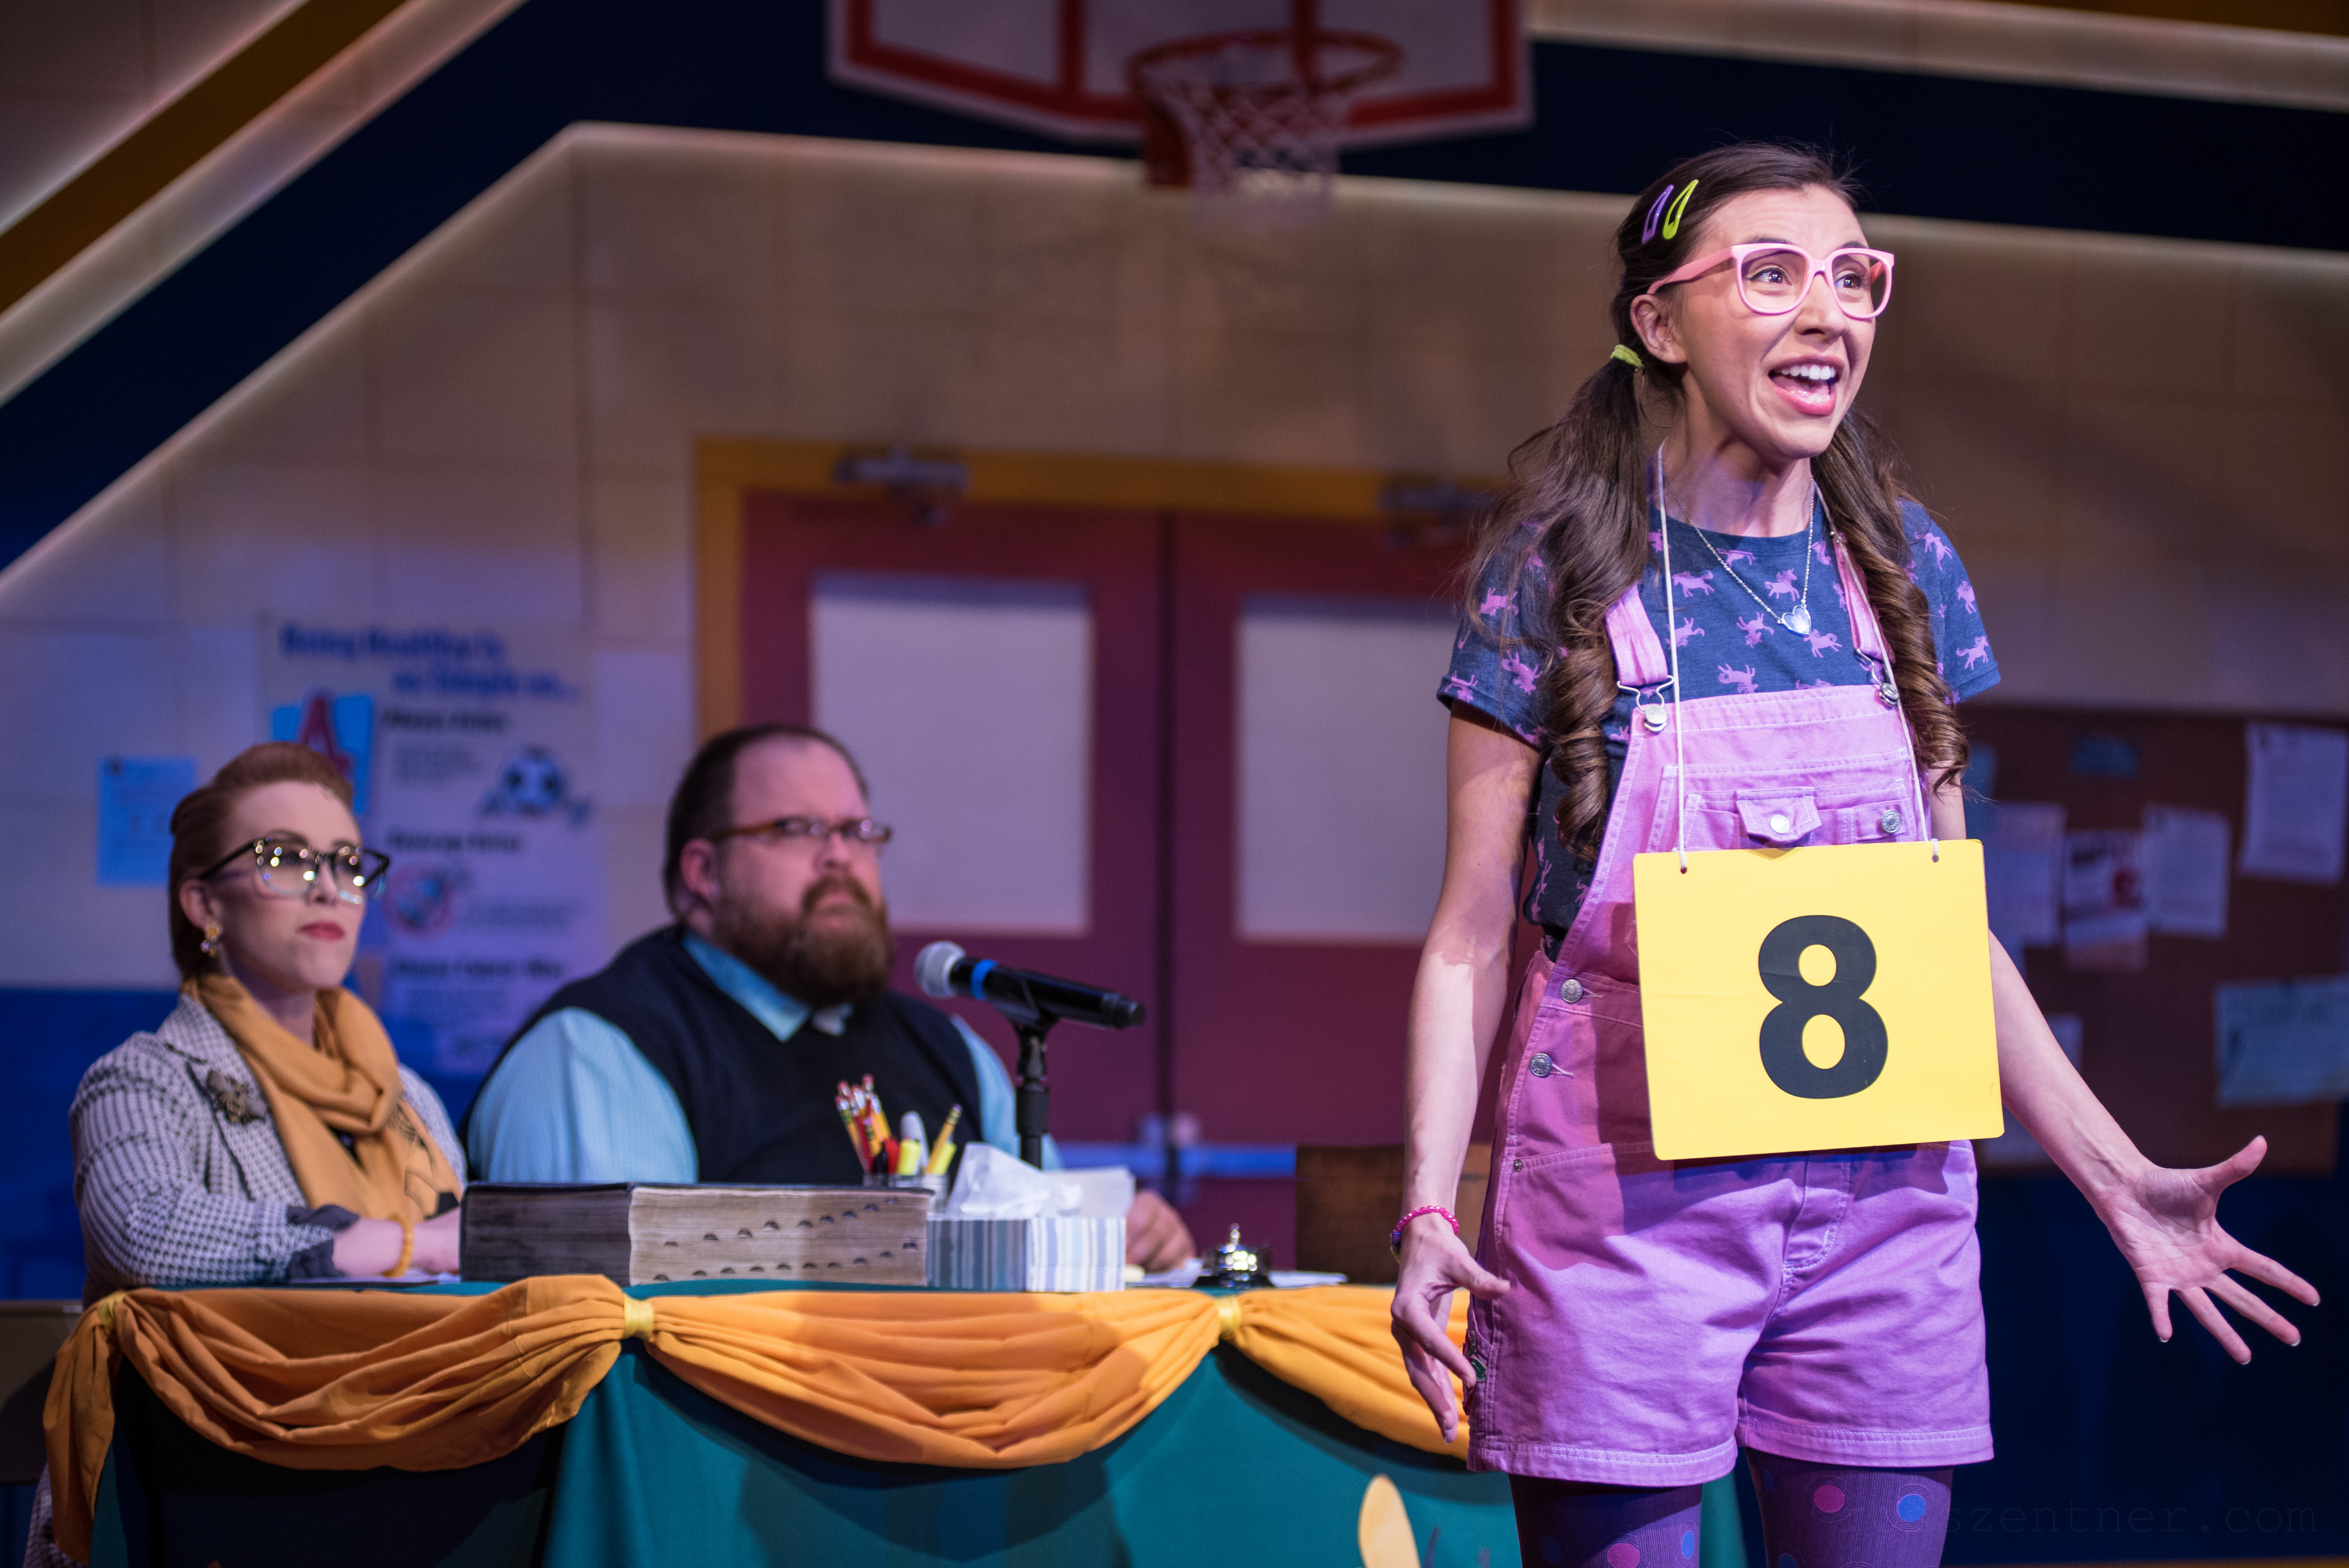 (l. to r.) Samantha Sostarich (Rona Lisa Peretti), Robby McGhee (Douglas Panch) and Amanda Rodriguez (Olive Ostrovsky) in Skylight Music Theatre’s production of The 25th Annual Putnam County Spelling Bee running February 7 – February 23, 2020. Photo by Ross Zentner.